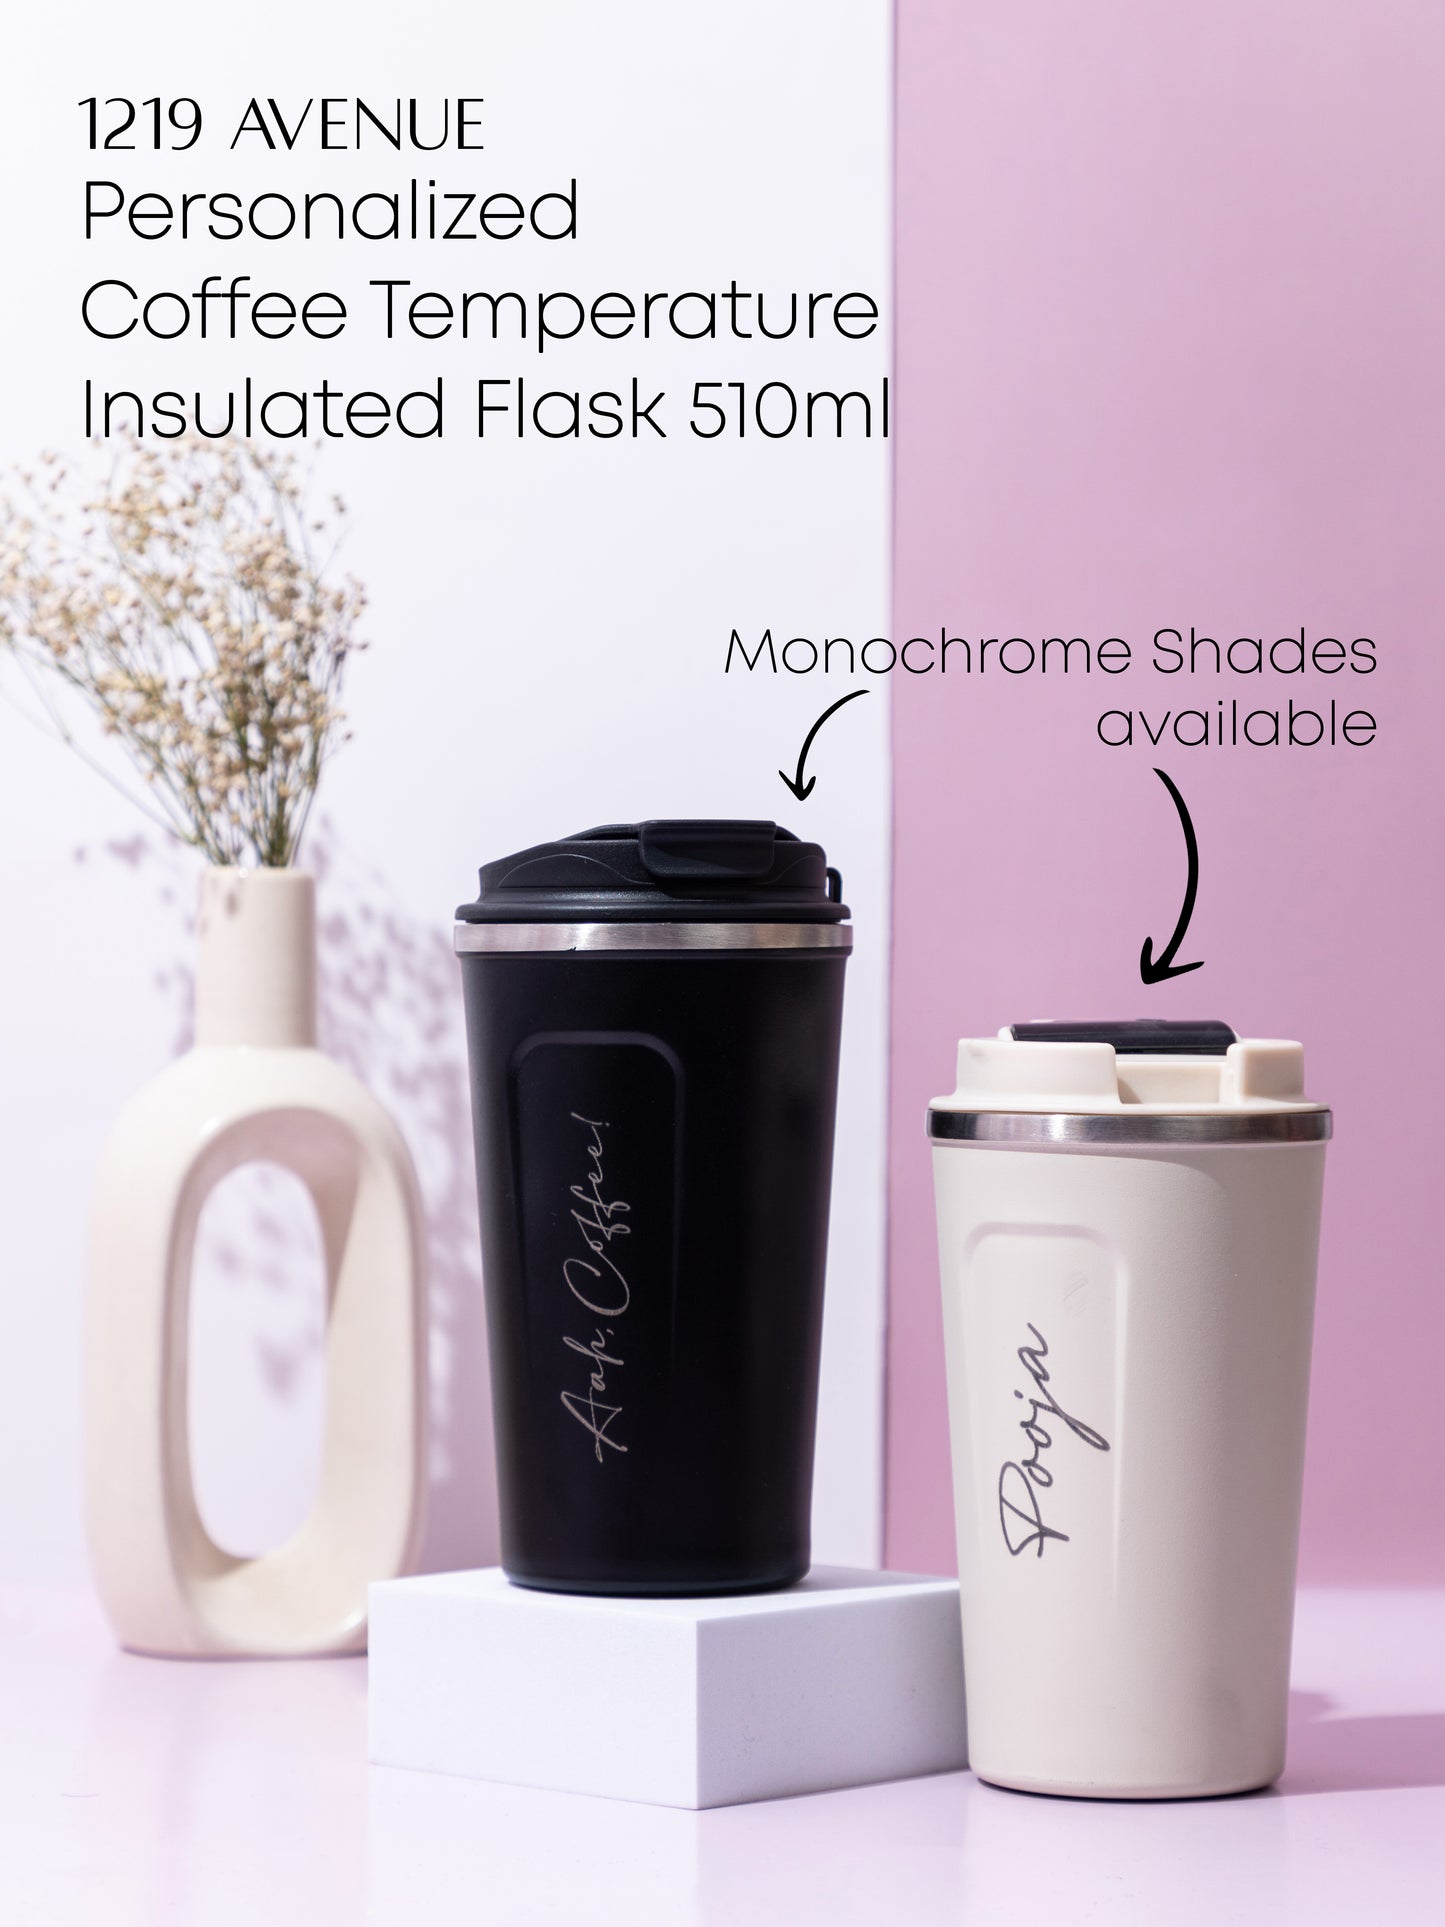 Personalized Name/Quote Temperature Display Portable Coffee Flask 500ml NO COD